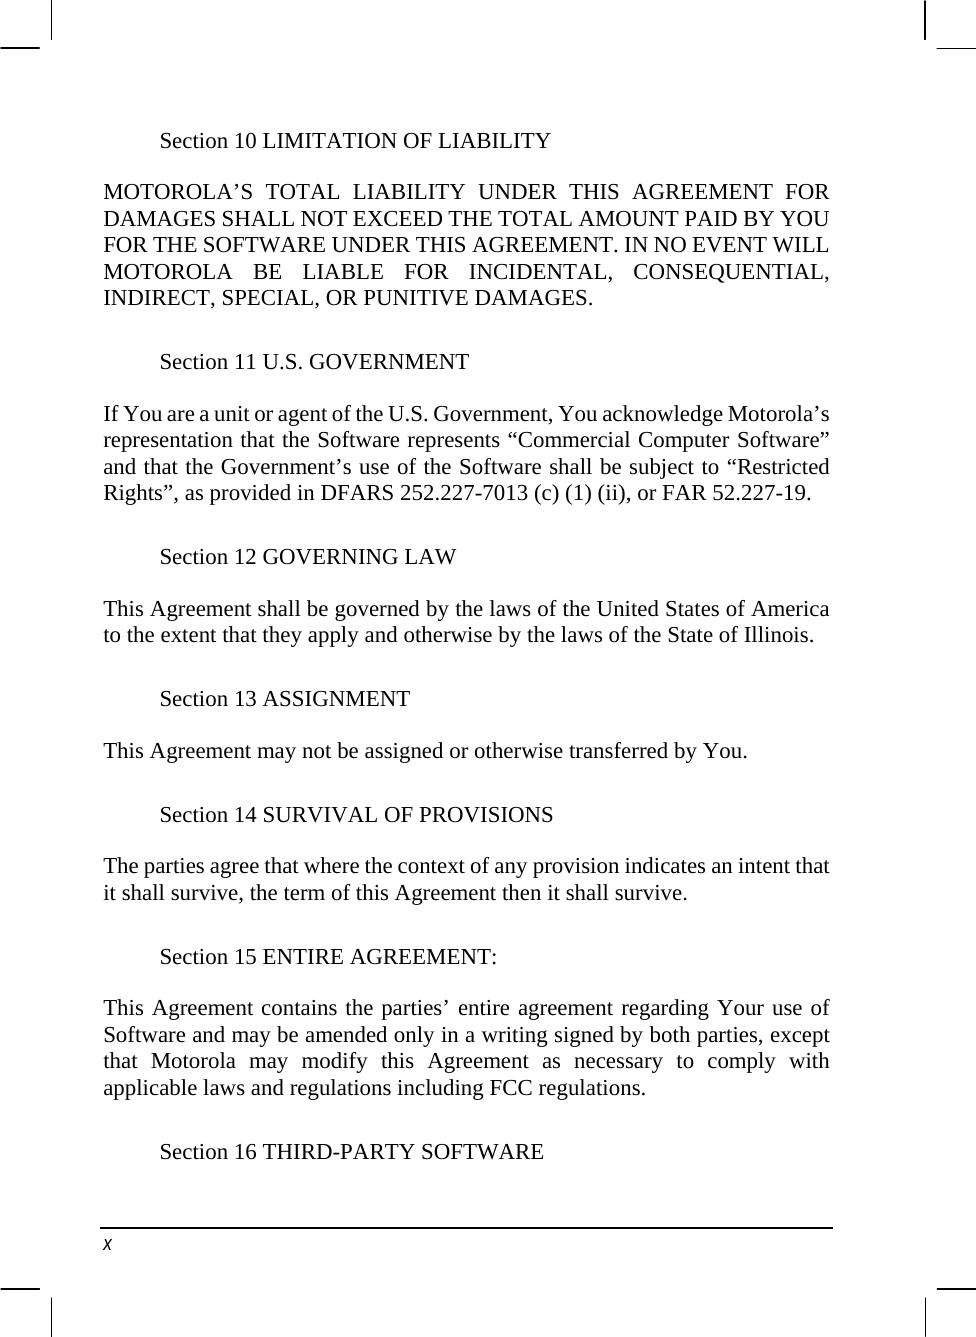  Section 10 LIMITATION OF LIABILITY MOTOROLA’S TOTAL LIABILITY UNDER THIS AGREEMENT FOR DAMAGES SHALL NOT EXCEED THE TOTAL AMOUNT PAID BY YOU FOR THE SOFTWARE UNDER THIS AGREEMENT. IN NO EVENT WILL MOTOROLA BE LIABLE FOR INCIDENTAL, CONSEQUENTIAL, INDIRECT, SPECIAL, OR PUNITIVE DAMAGES. Section 11 U.S. GOVERNMENT If You are a unit or agent of the U.S. Government, You acknowledge Motorola’s representation that the Software represents “Commercial Computer Software” and that the Government’s use of the Software shall be subject to “Restricted Rights”, as provided in DFARS 252.227-7013 (c) (1) (ii), or FAR 52.227-19. Section 12 GOVERNING LAW This Agreement shall be governed by the laws of the United States of America to the extent that they apply and otherwise by the laws of the State of Illinois. Section 13 ASSIGNMENT This Agreement may not be assigned or otherwise transferred by You. Section 14 SURVIVAL OF PROVISIONS The parties agree that where the context of any provision indicates an intent that it shall survive, the term of this Agreement then it shall survive. Section 15 ENTIRE AGREEMENT: This Agreement contains the parties’ entire agreement regarding Your use of Software and may be amended only in a writing signed by both parties, except that Motorola may modify this Agreement as necessary to comply with applicable laws and regulations including FCC regulations. Section 16 THIRD-PARTY SOFTWARE x 